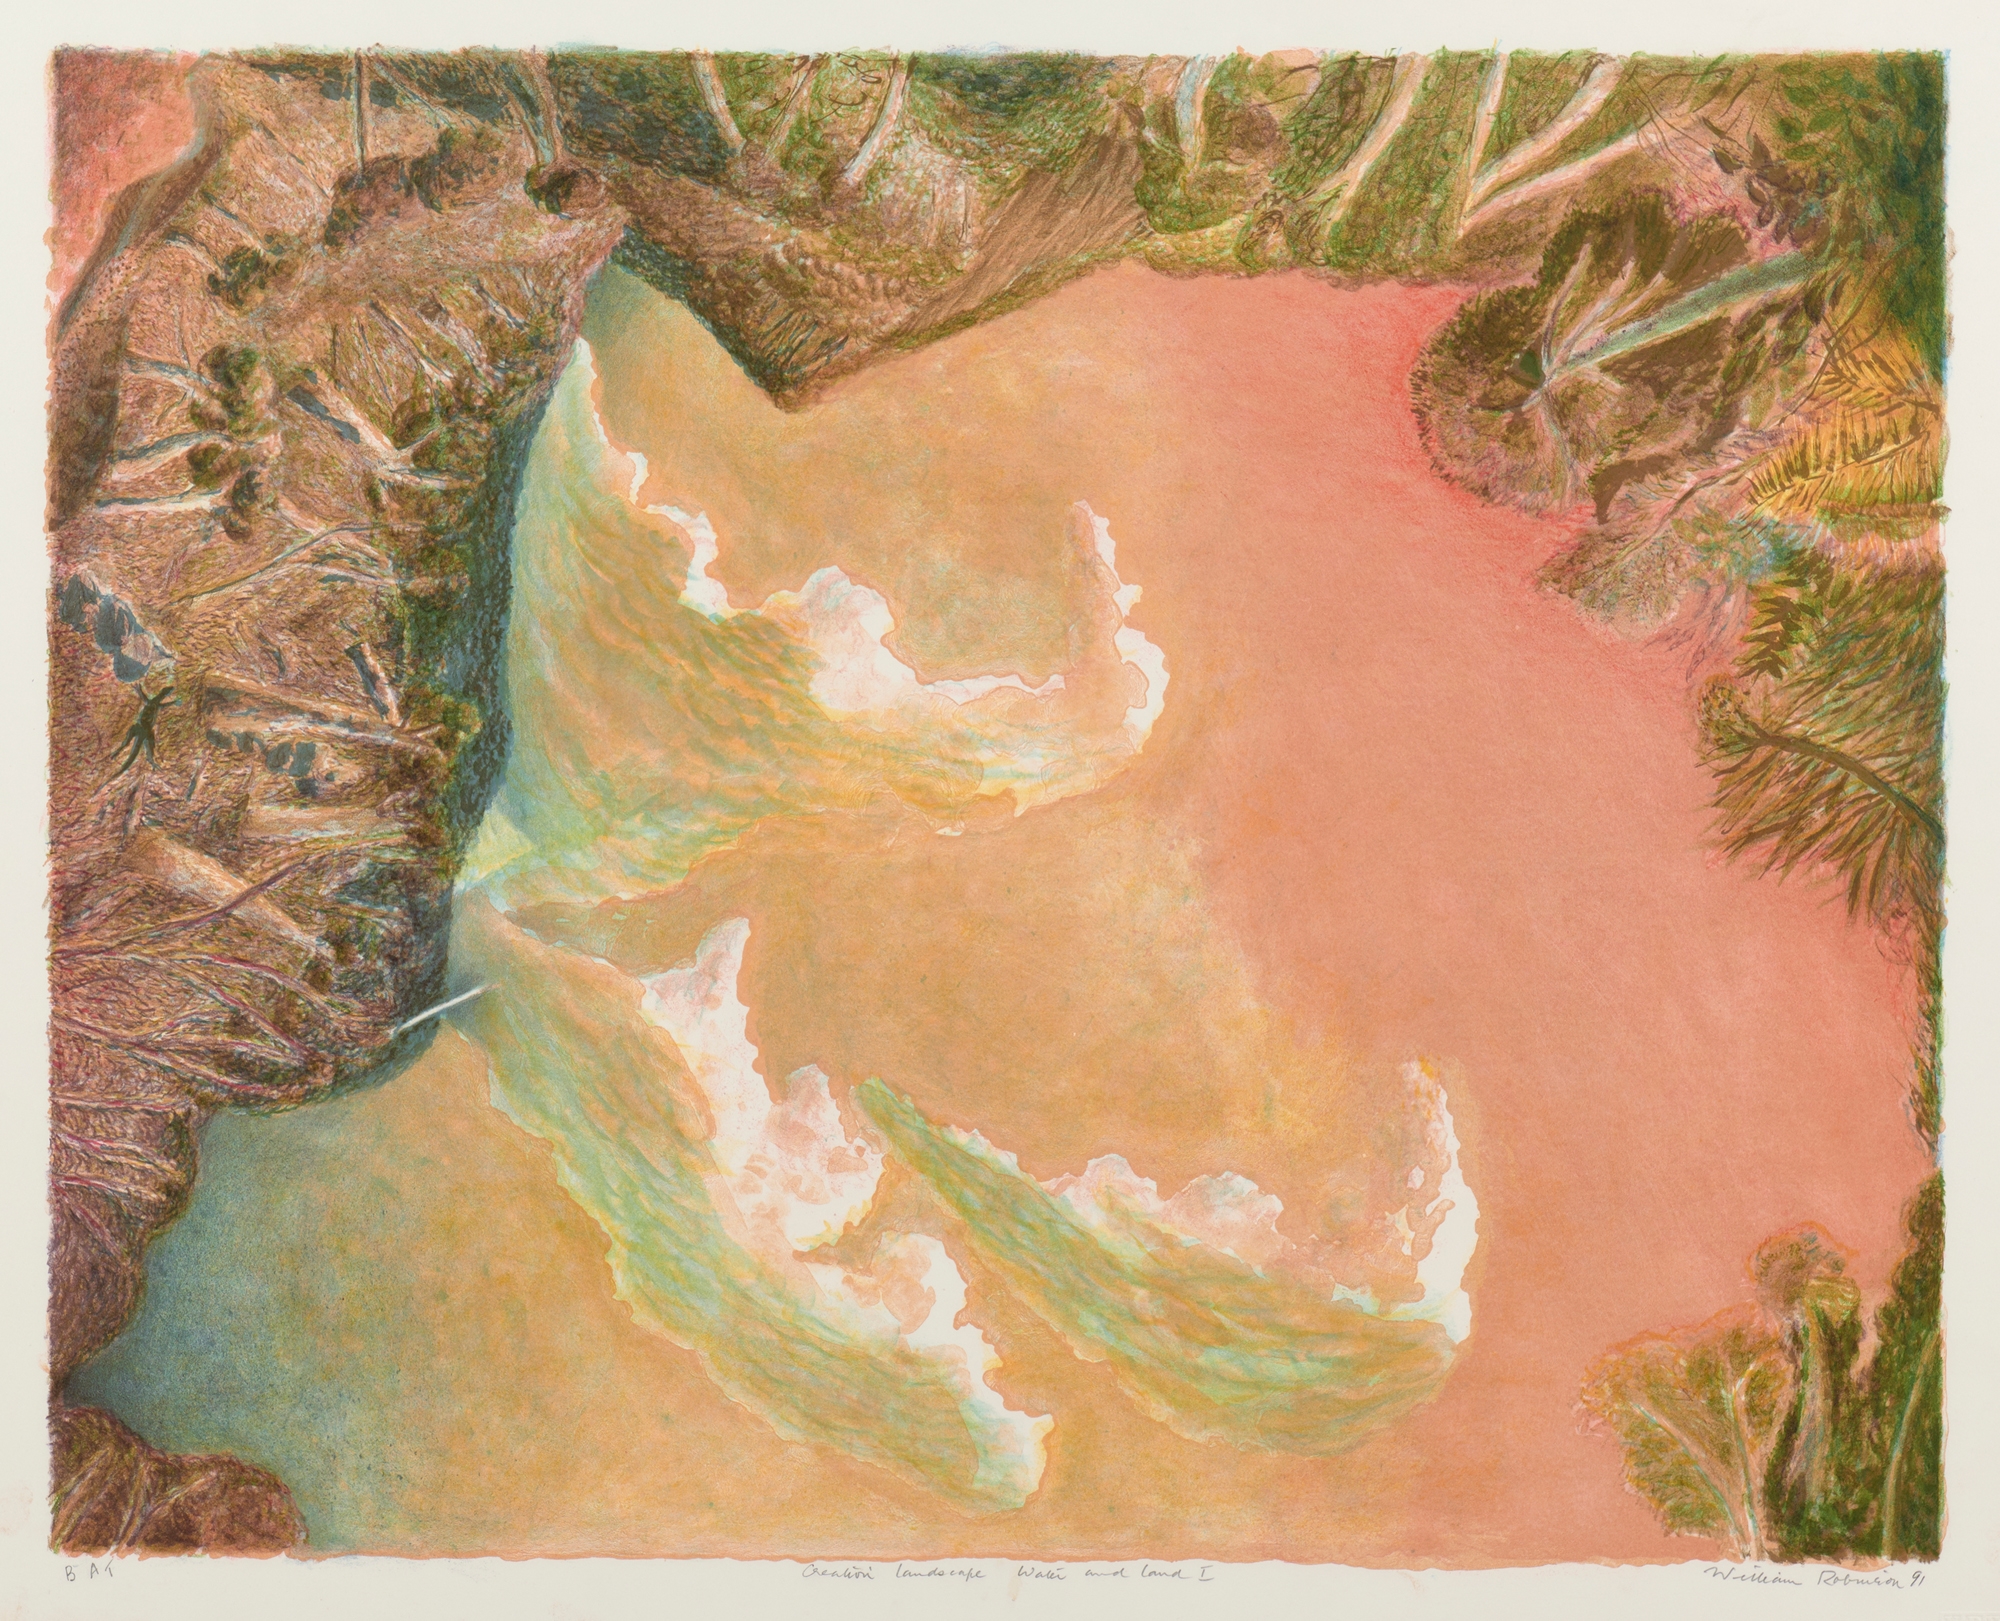 Artwork by William Robinson, Creation Landscape: Water and Land, Made of lithograph